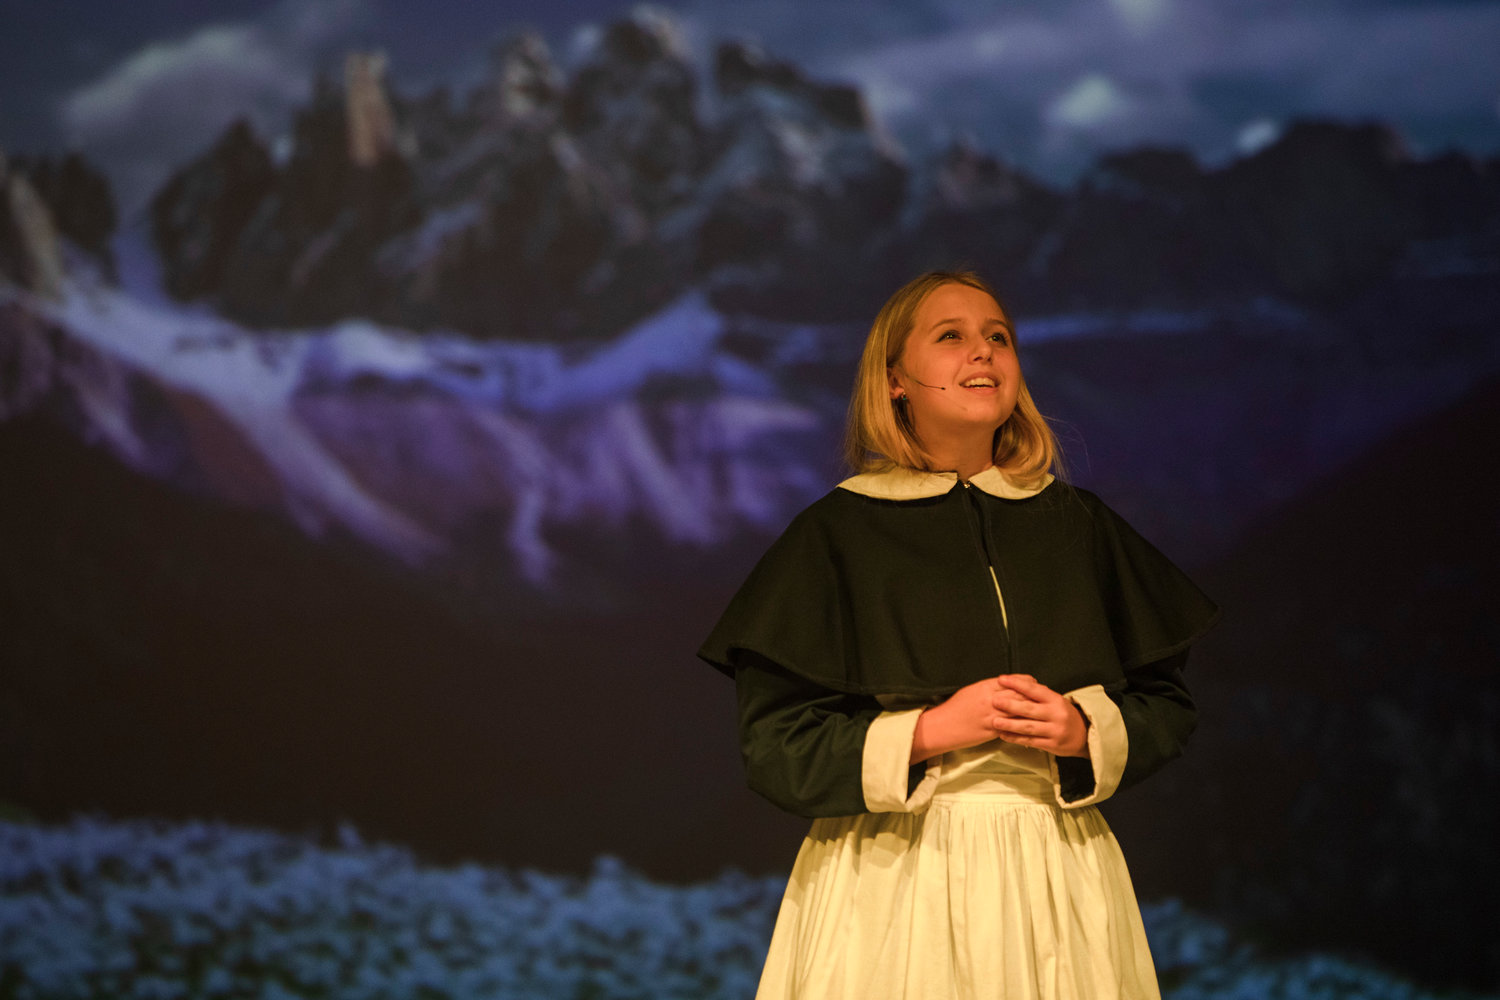 Lizzy Rayfield, as Maria, rehearses one of the first scenes of The Sound of Music on Monday at The Orange Beach Performing Arts Center.